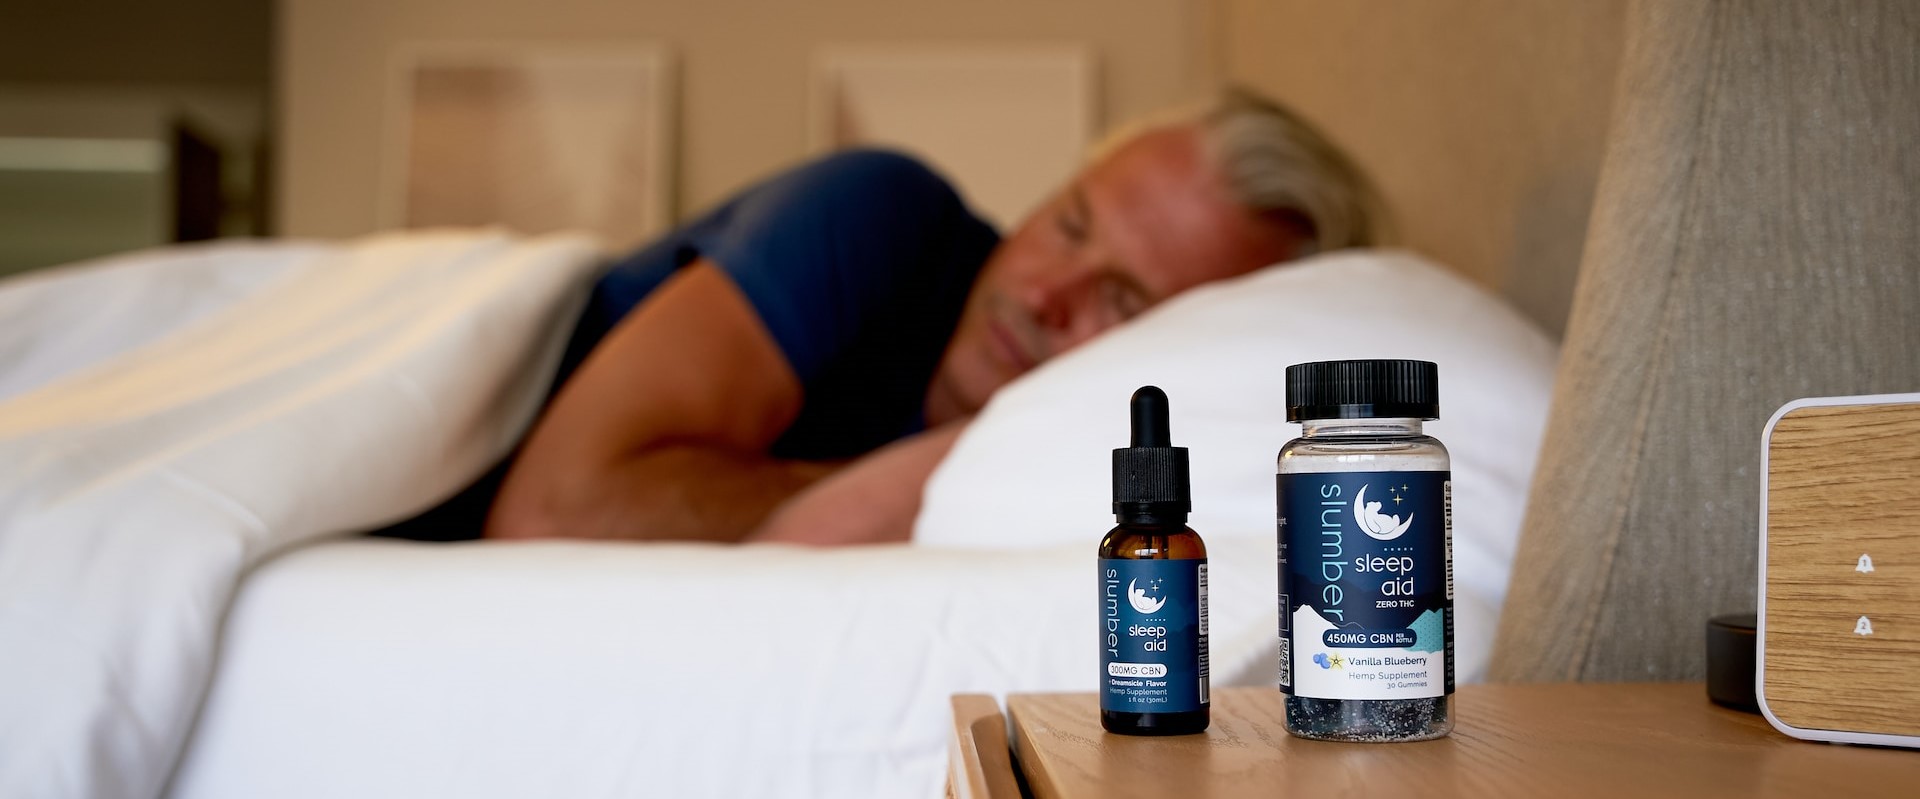 CBD oil bottle and a person sleeping peacefully